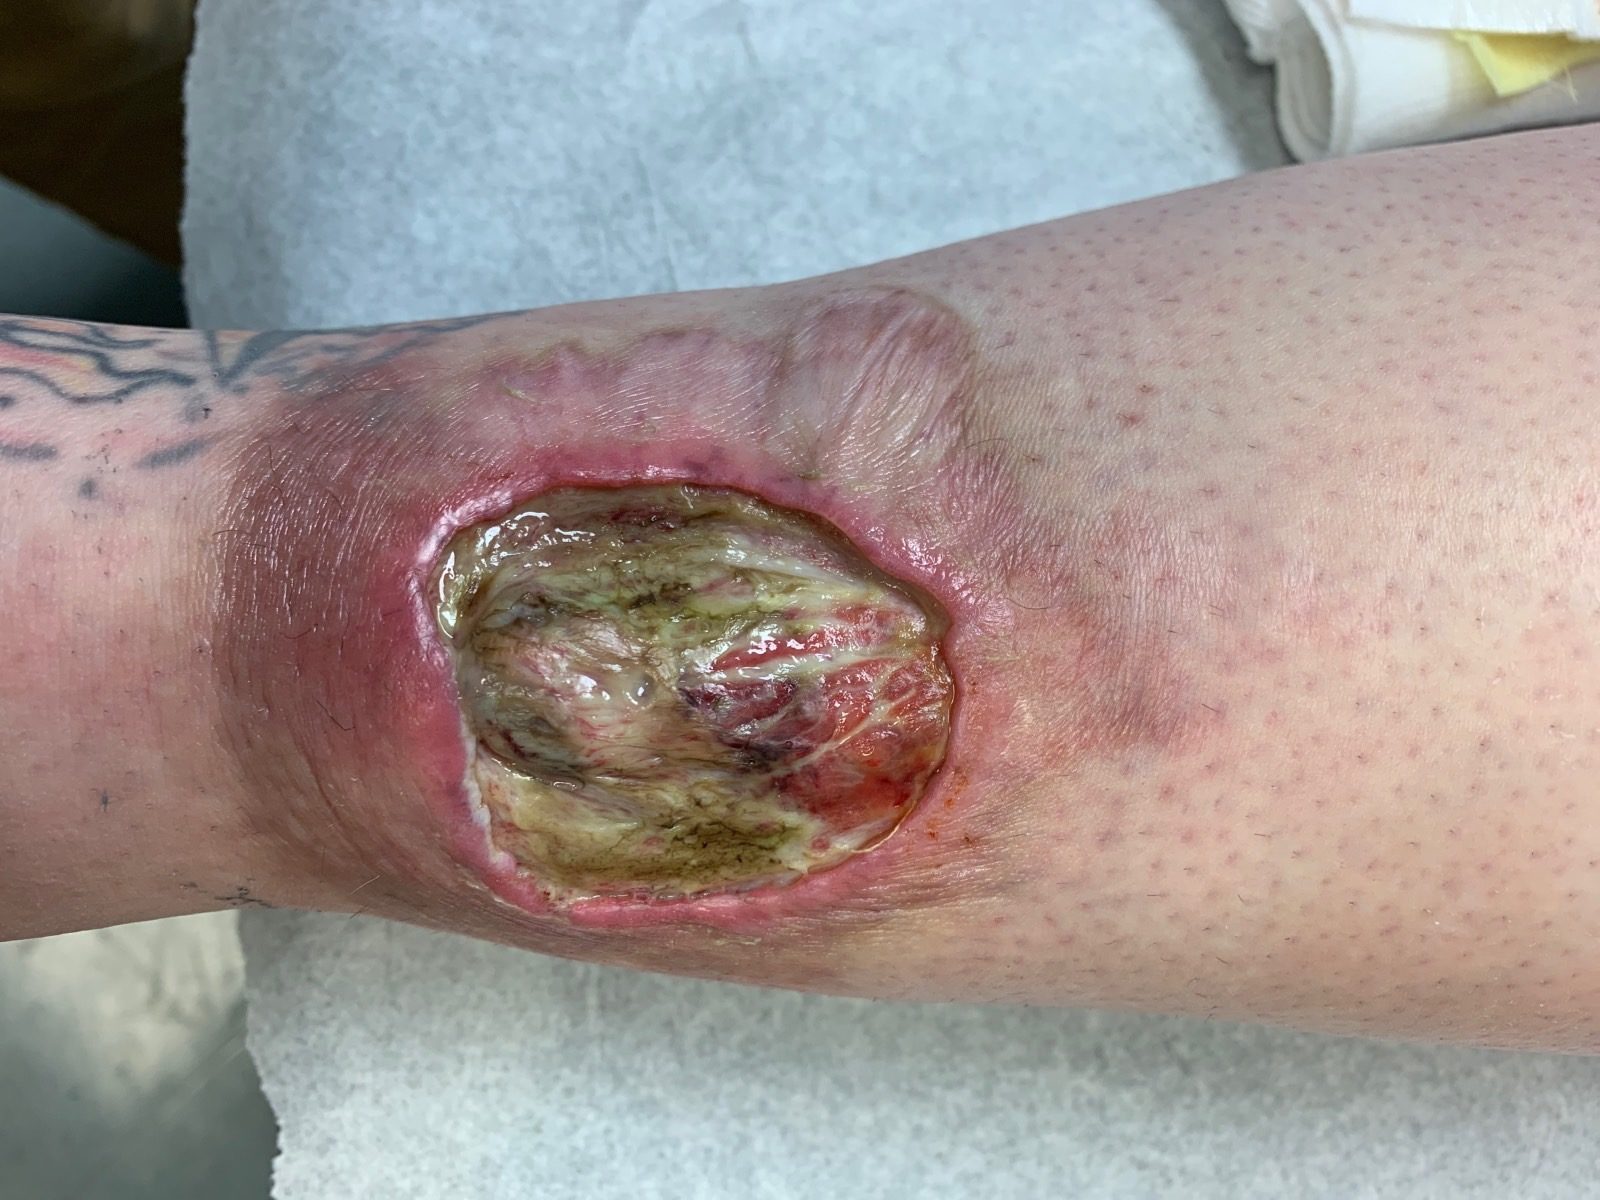 Ulcer with violaceous rolled borders, purulent base and granulation tissue